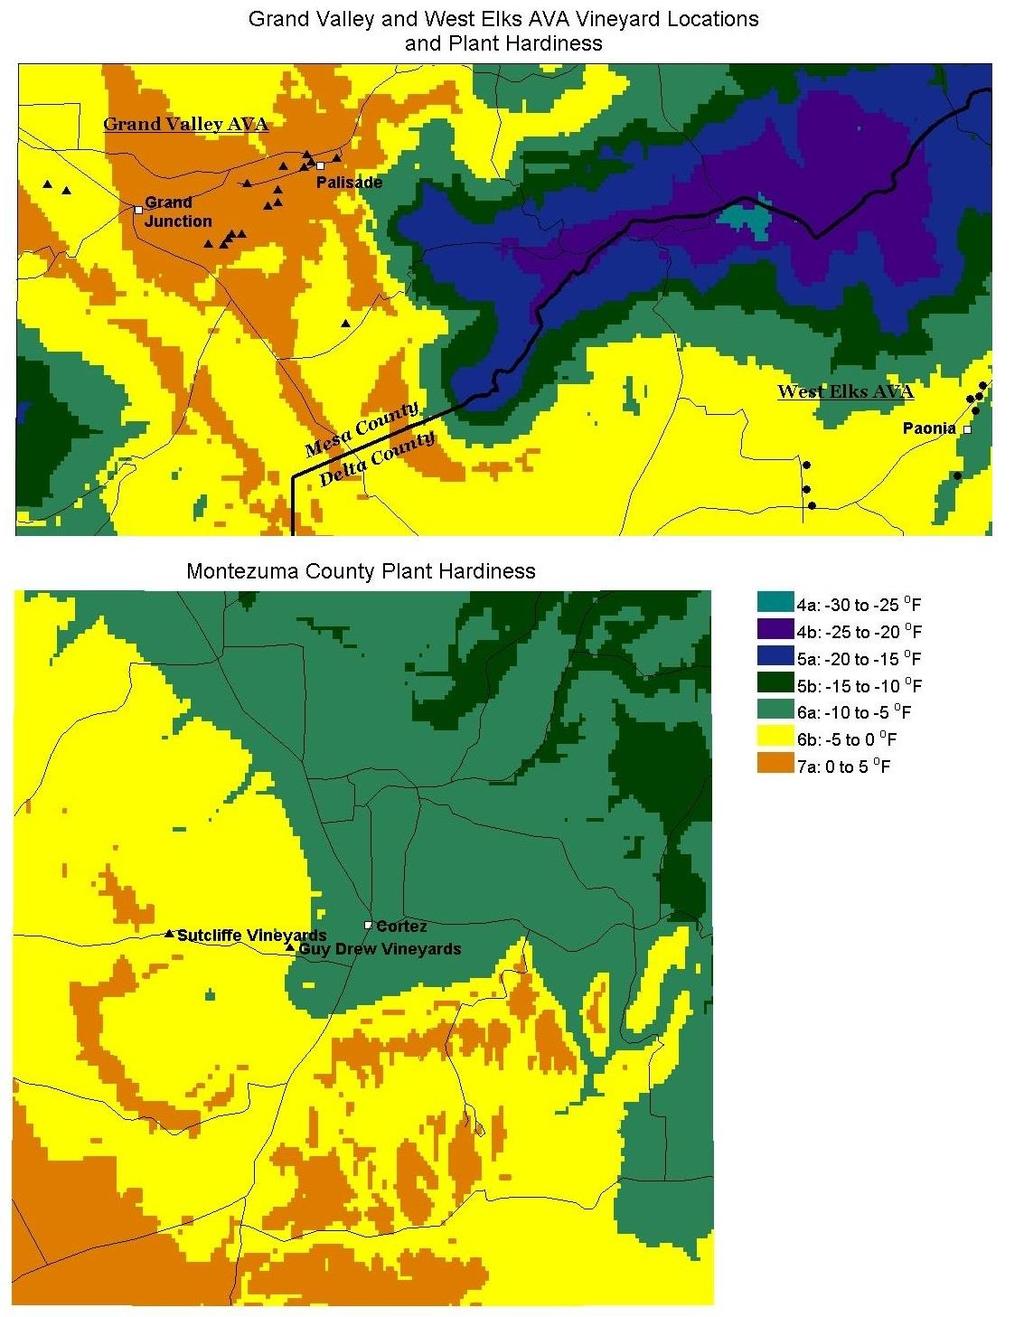 Fig. 3: Plant Hardiness Zone Map with overlays of vineyard locations for Mesa/Delta County in W. Central Colorado and Montezuma County (bottom).